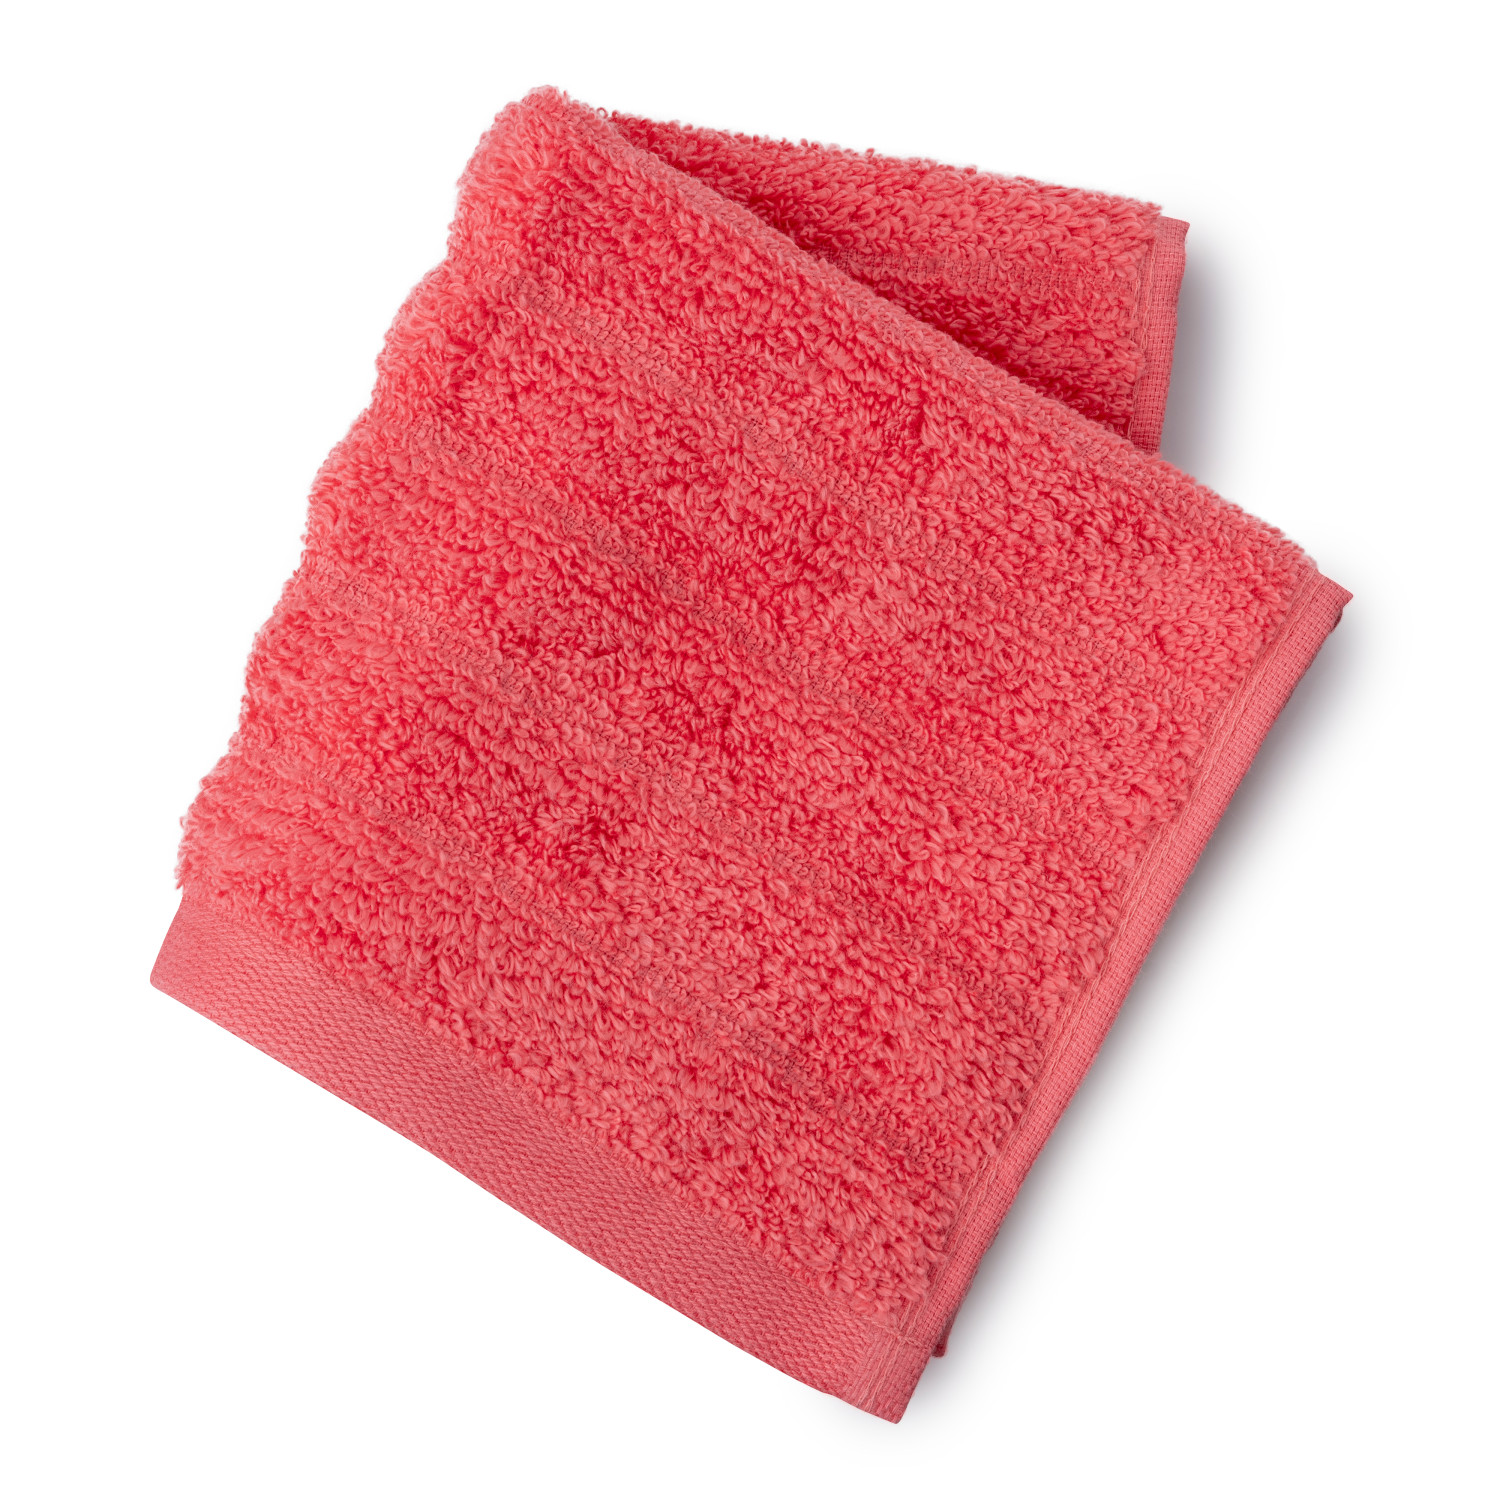 Mainstays Performance 6-Piece Towel Set, Textured Island Coral - image 5 of 7